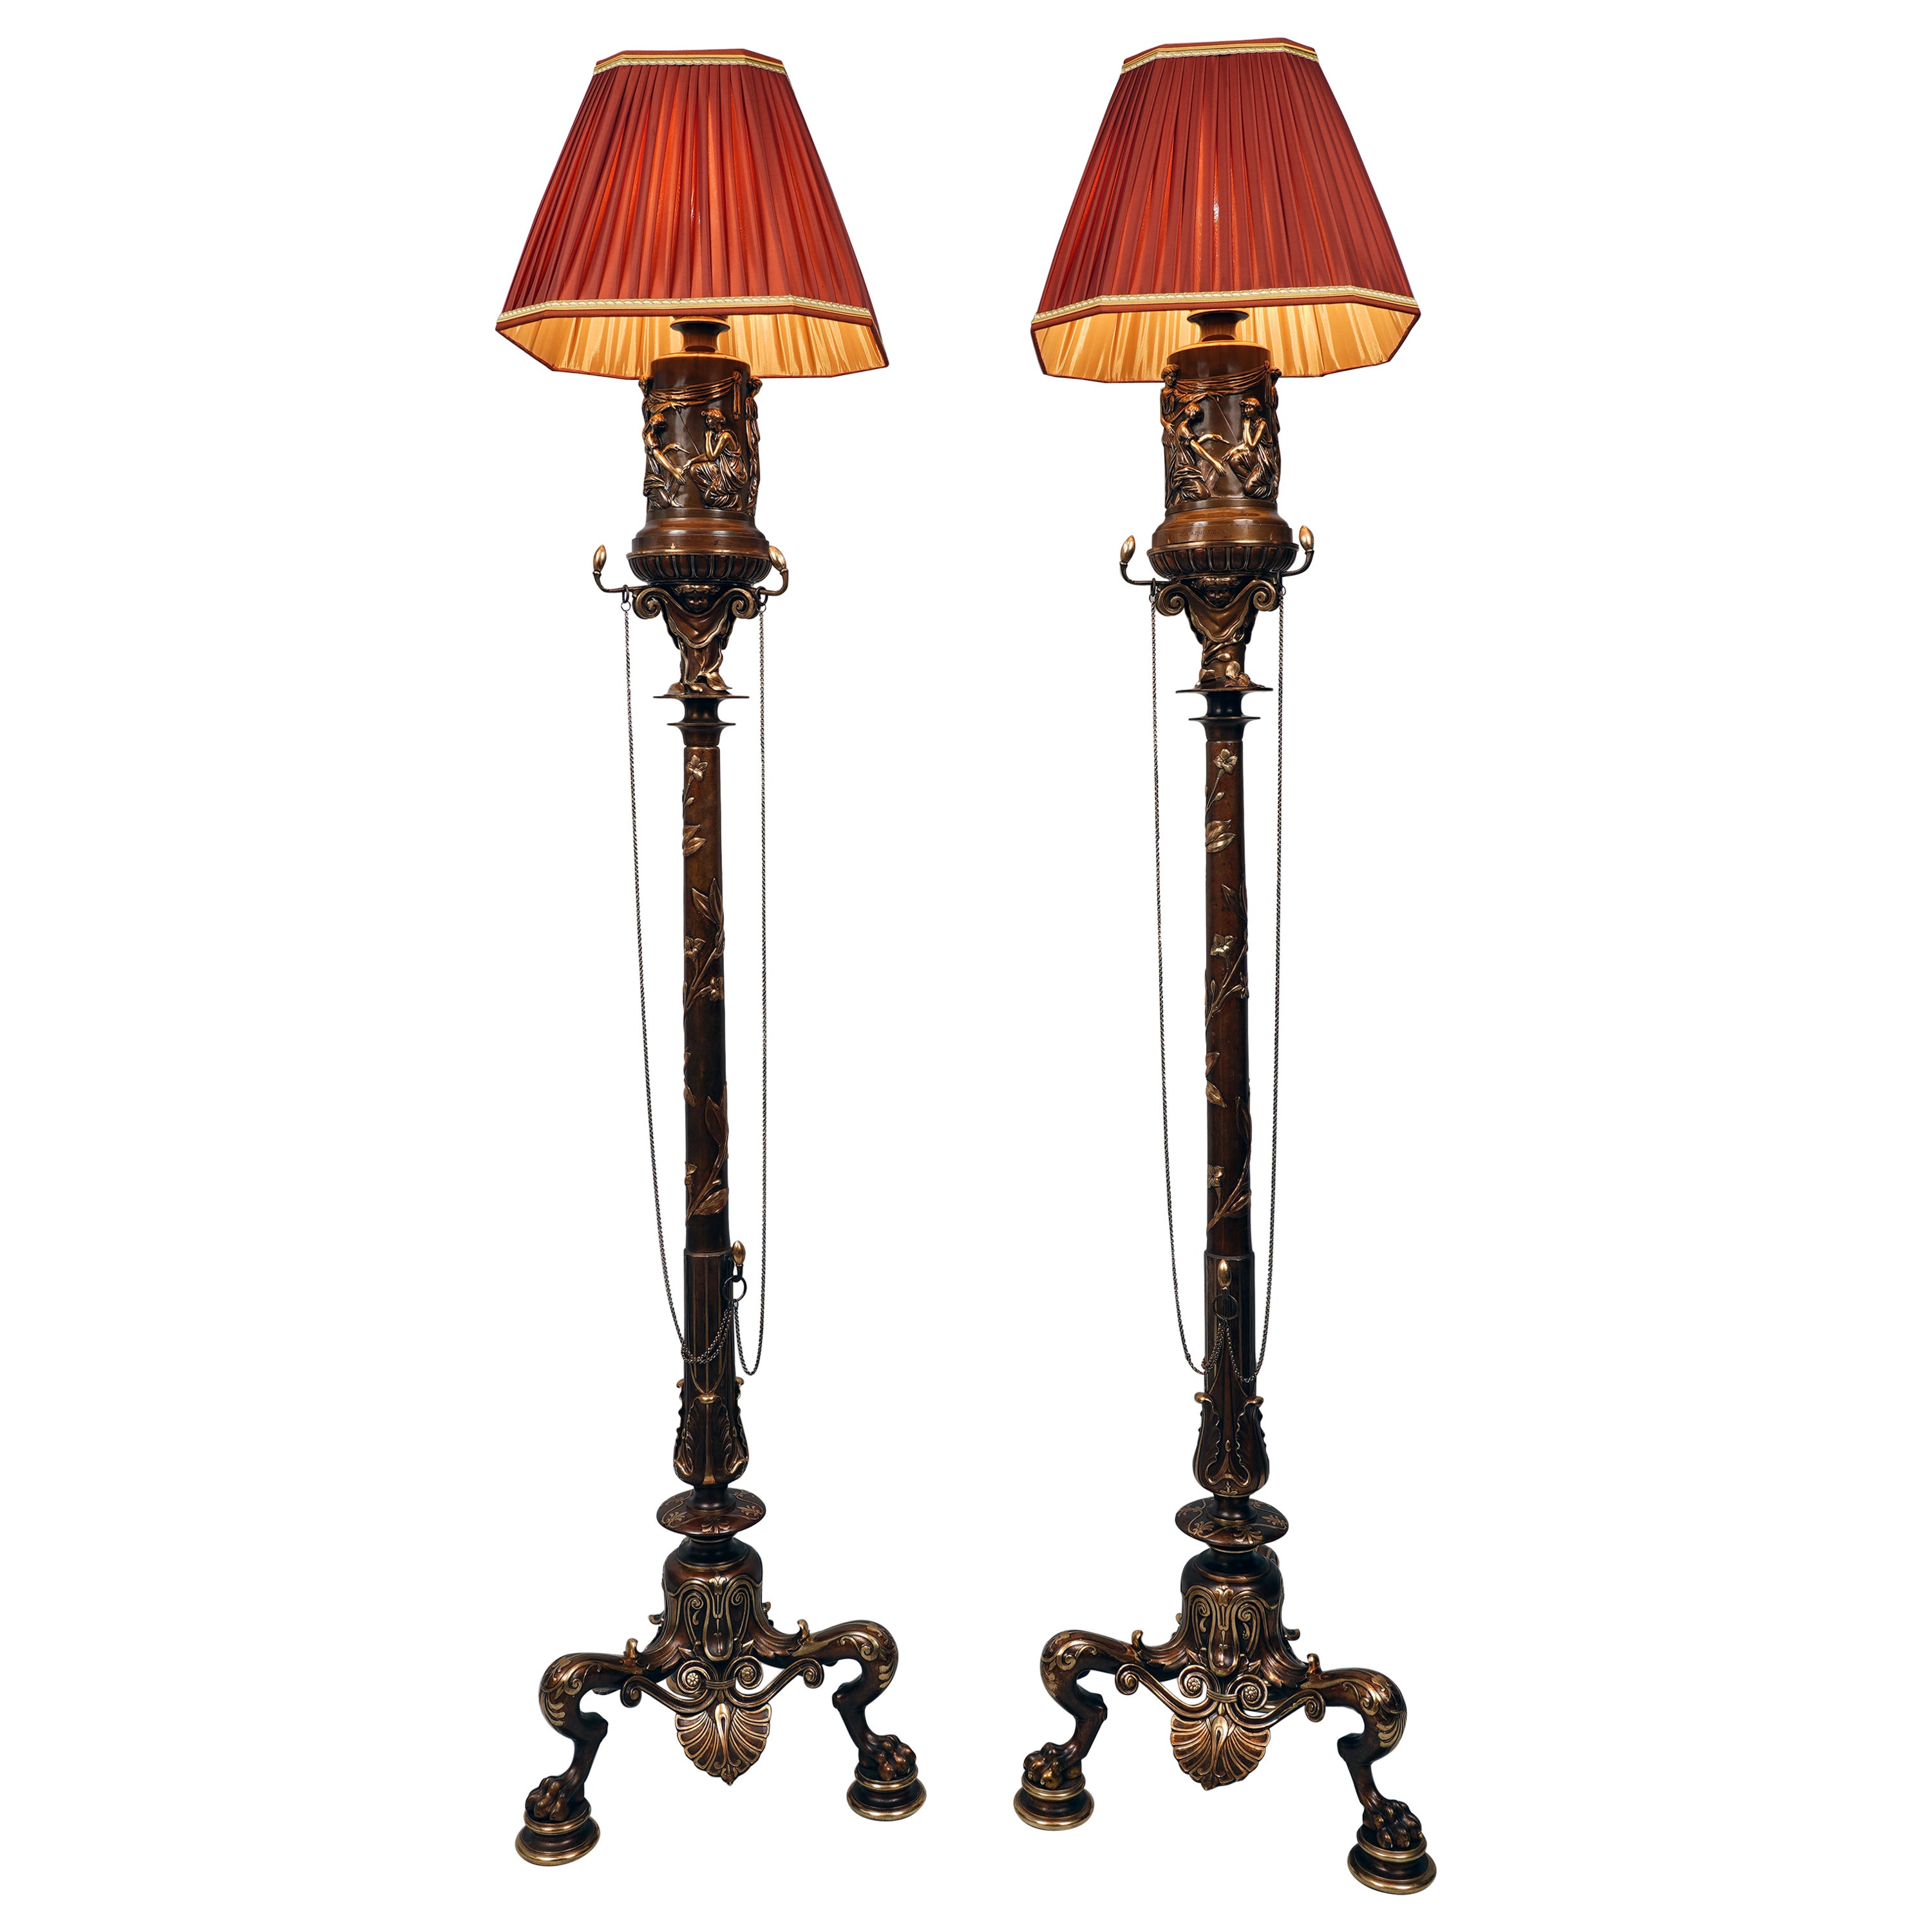 Pair of Neo-Greek Bronze Floor Lamps by F. Barbedienne, France, circa 1860 For Sale